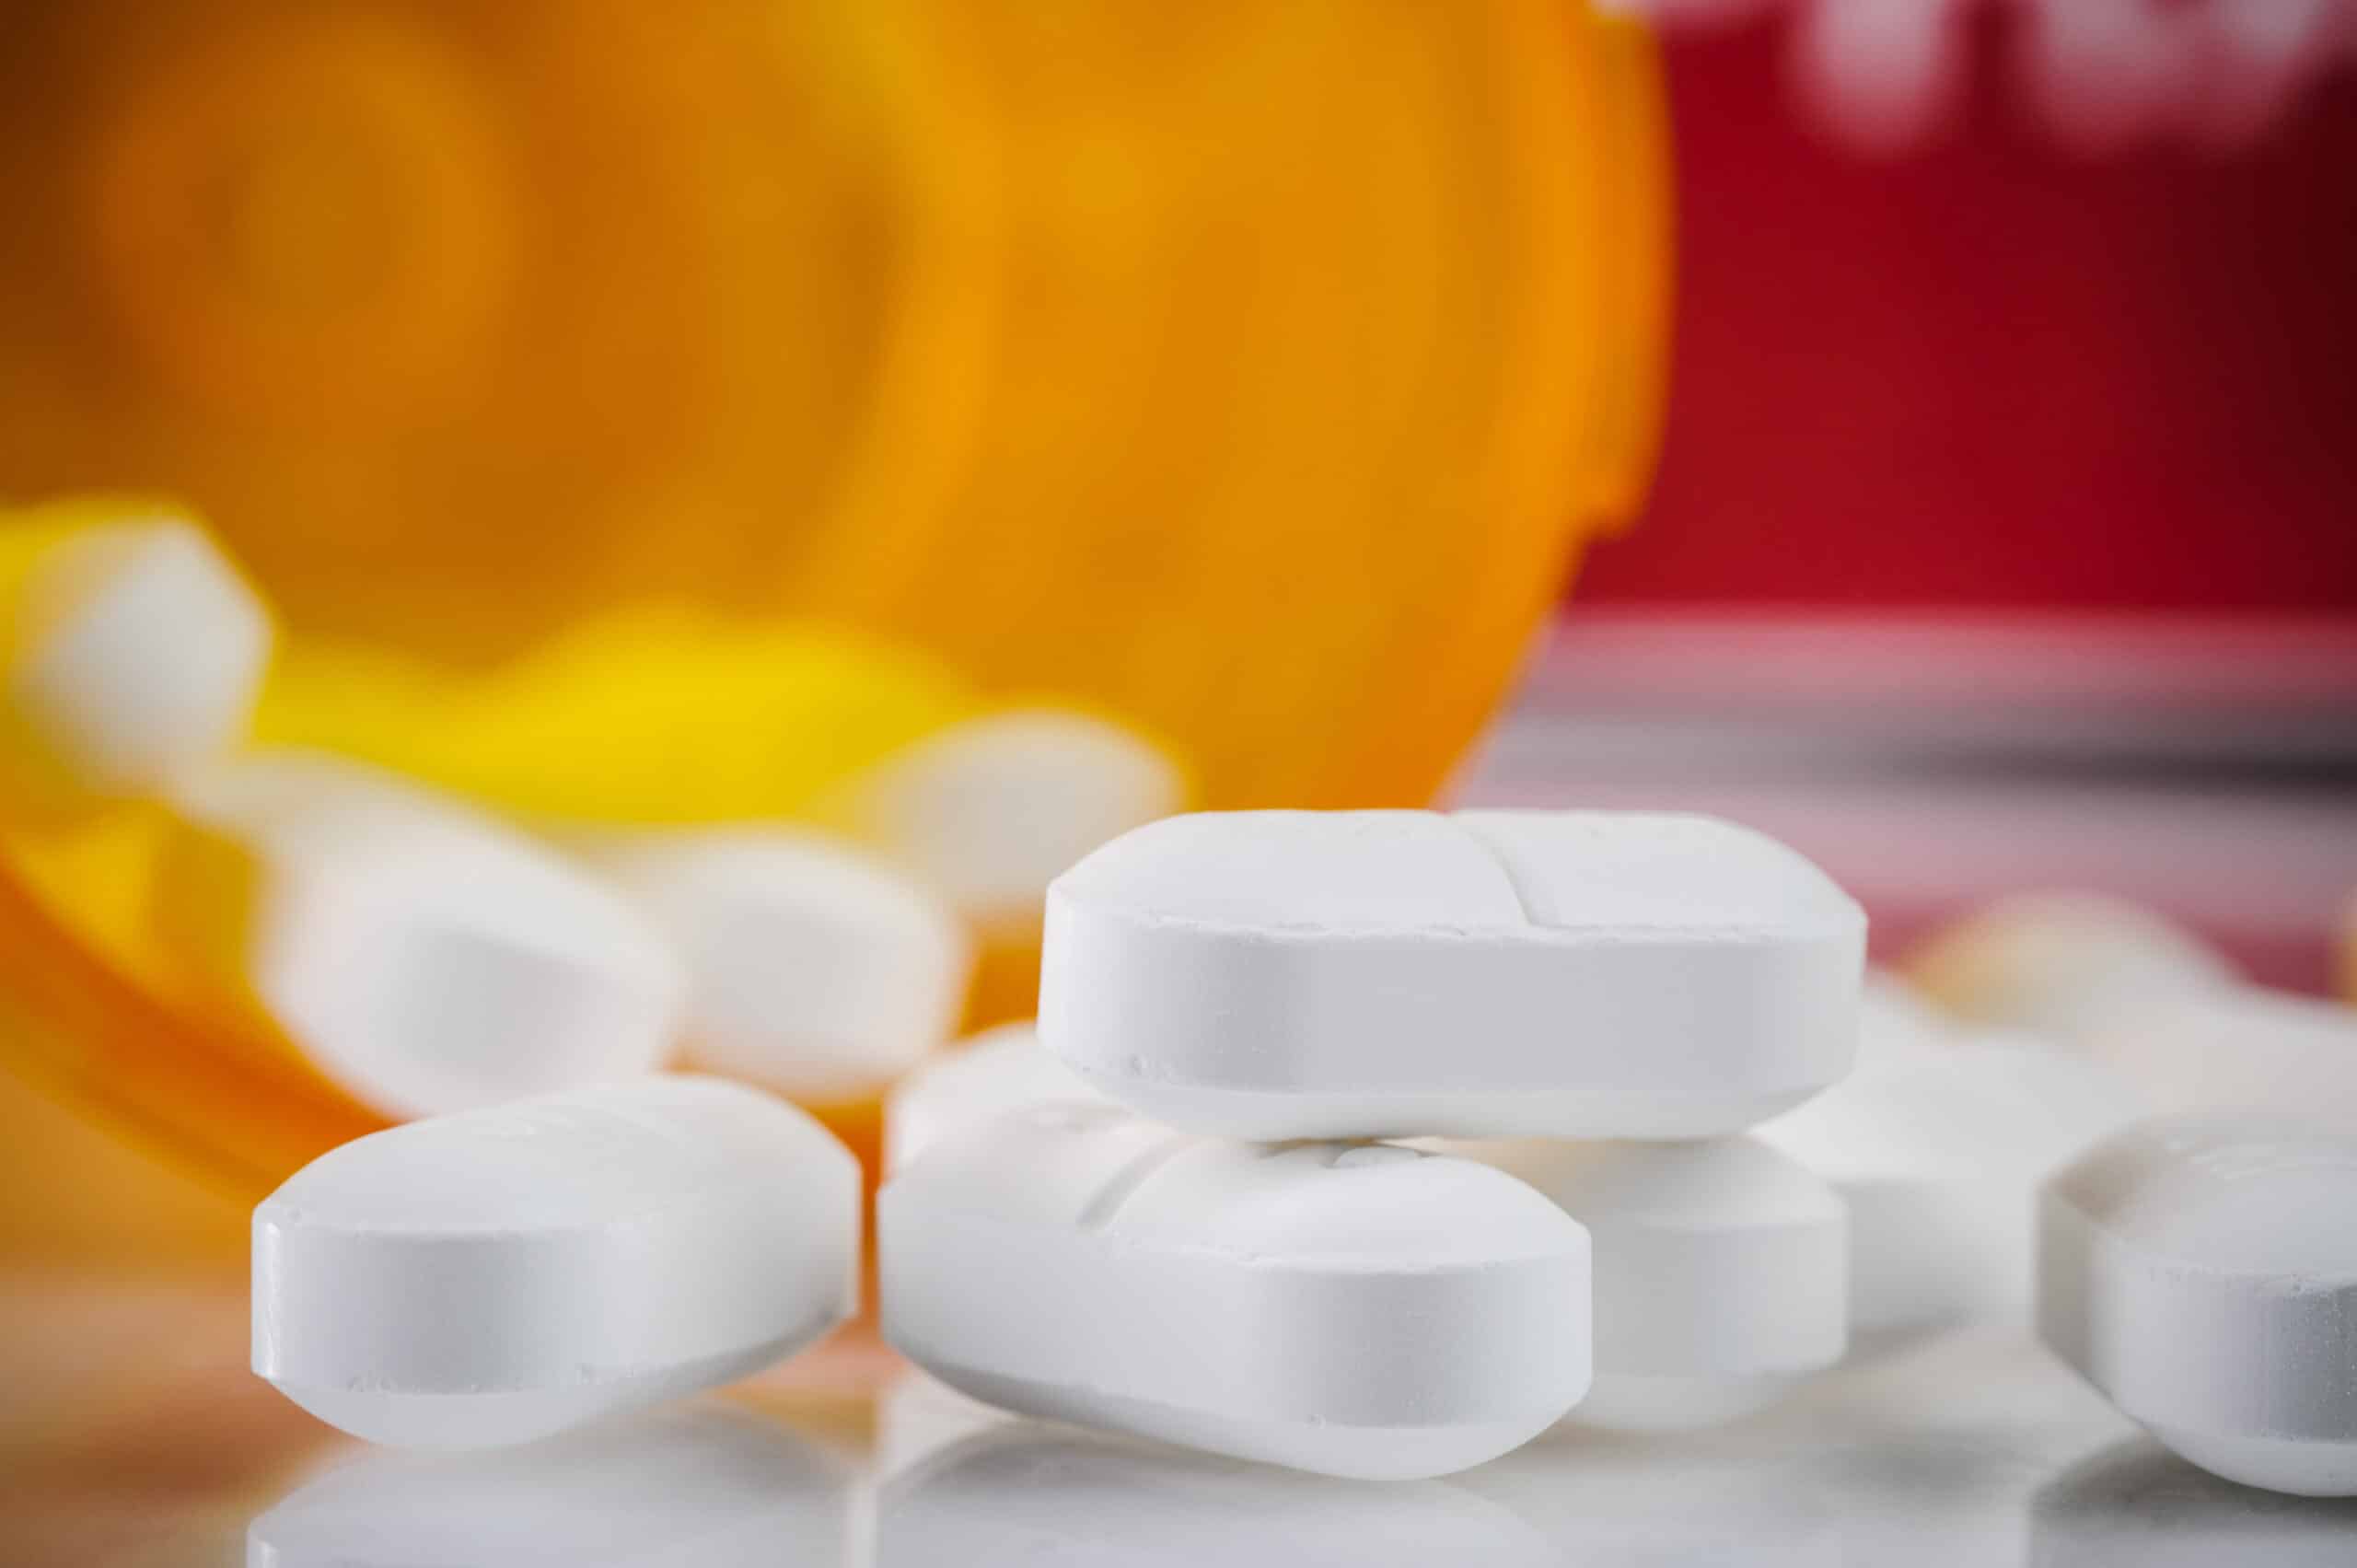 What Are the Signs of Prescription Drug Abuse?